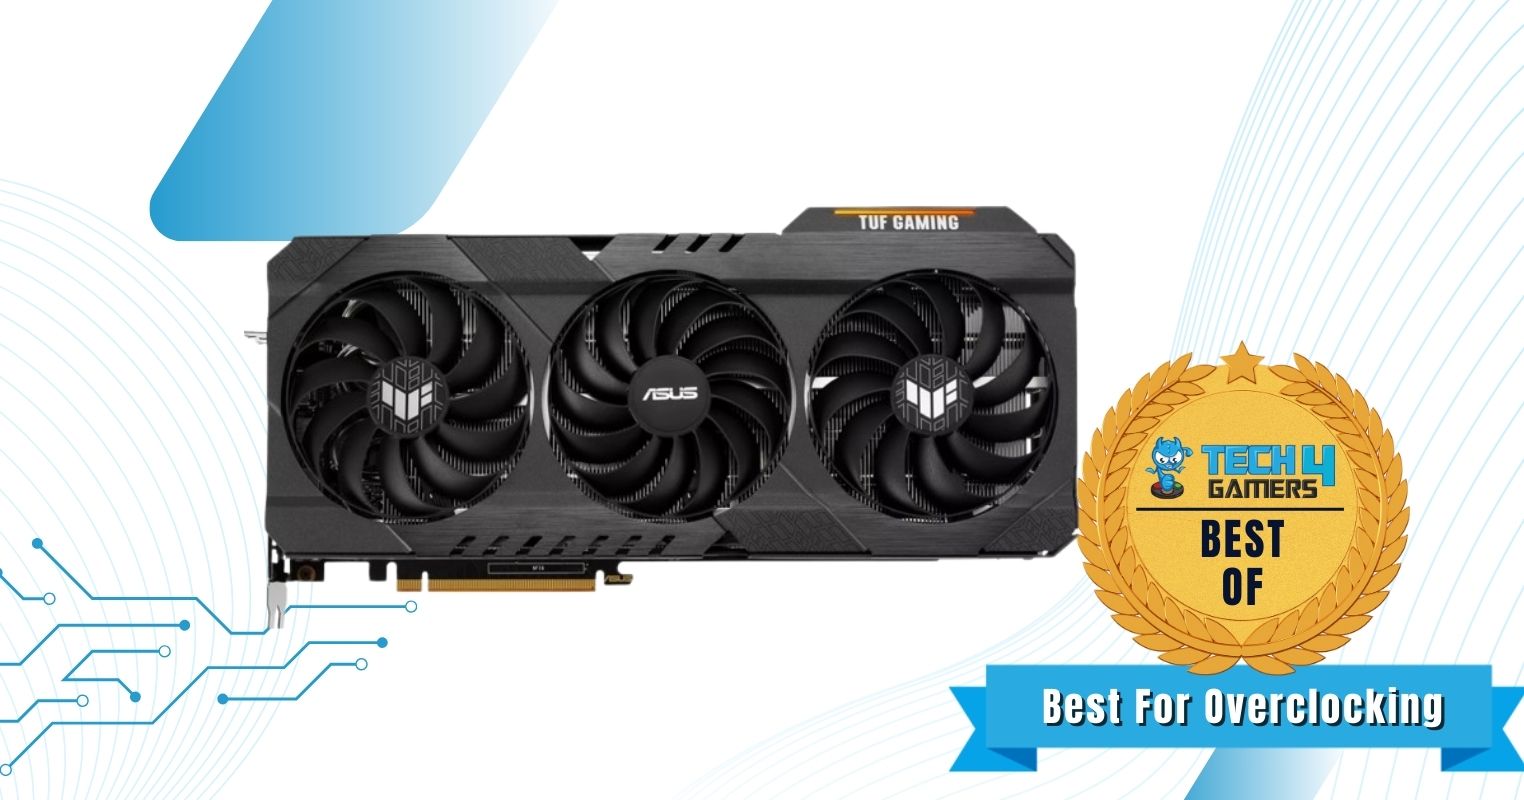 ASUS TUF Gaming Radeon RX 6700 XT OC Edition - Best RX 6700 XT for Overclocking